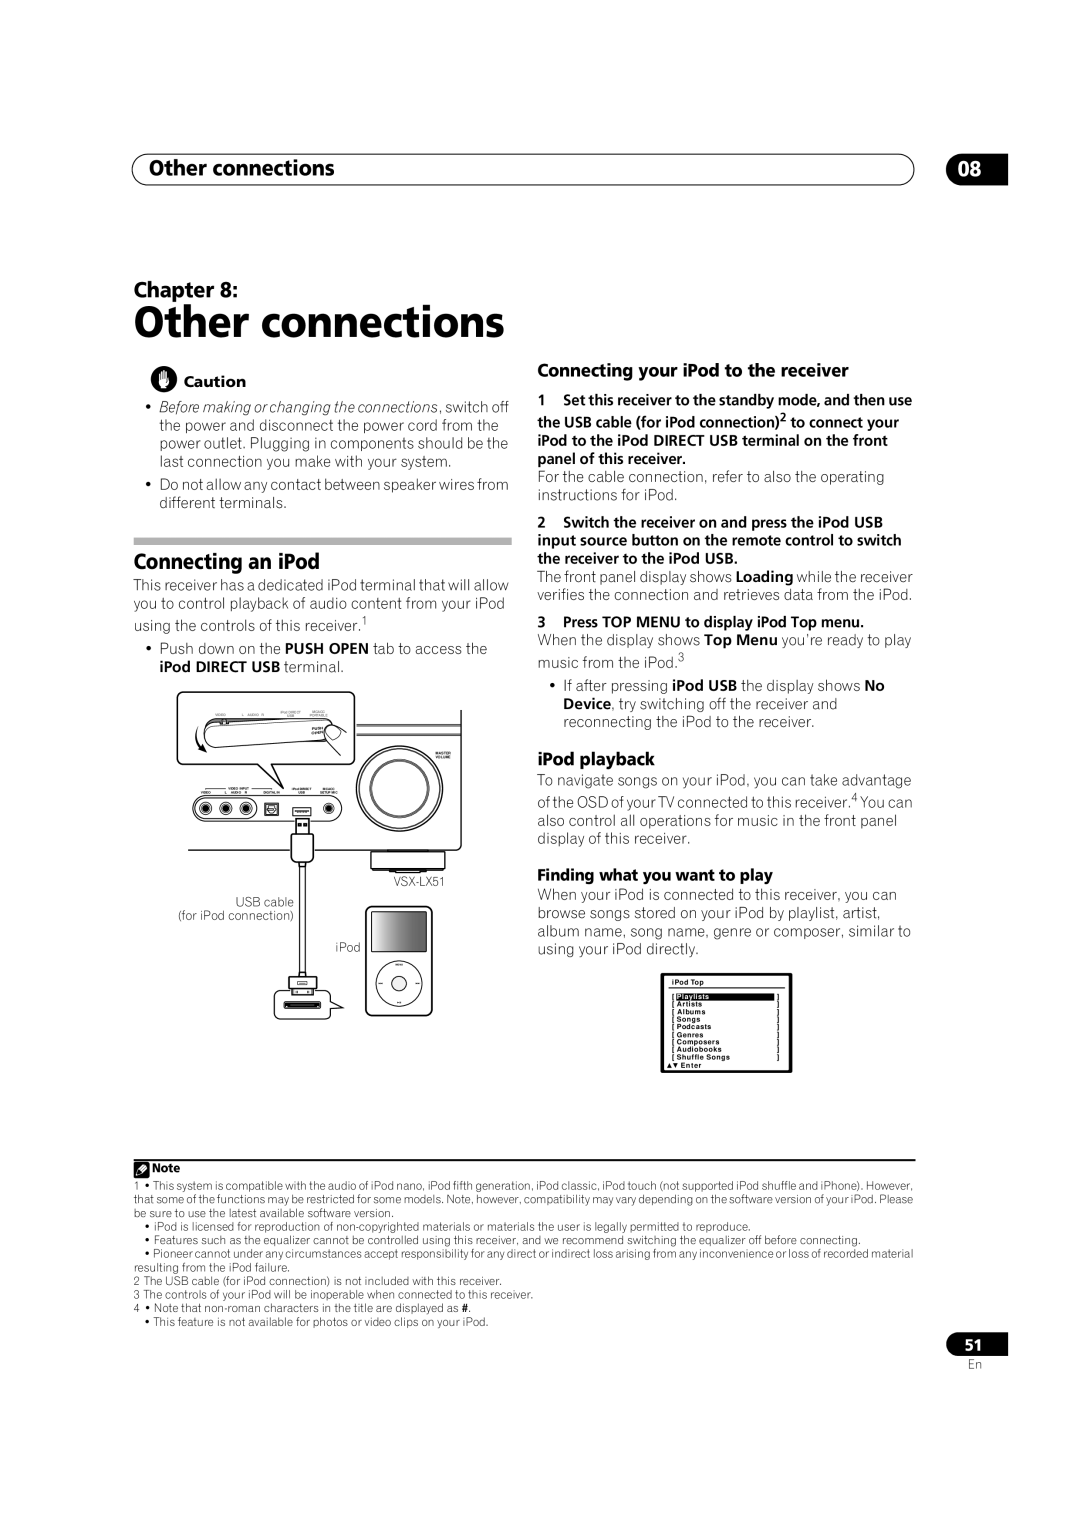 Pioneer VSX-LX51 Other connections Chapter, Connecting an iPod, Connecting your iPod to the receiver, iPod playback 